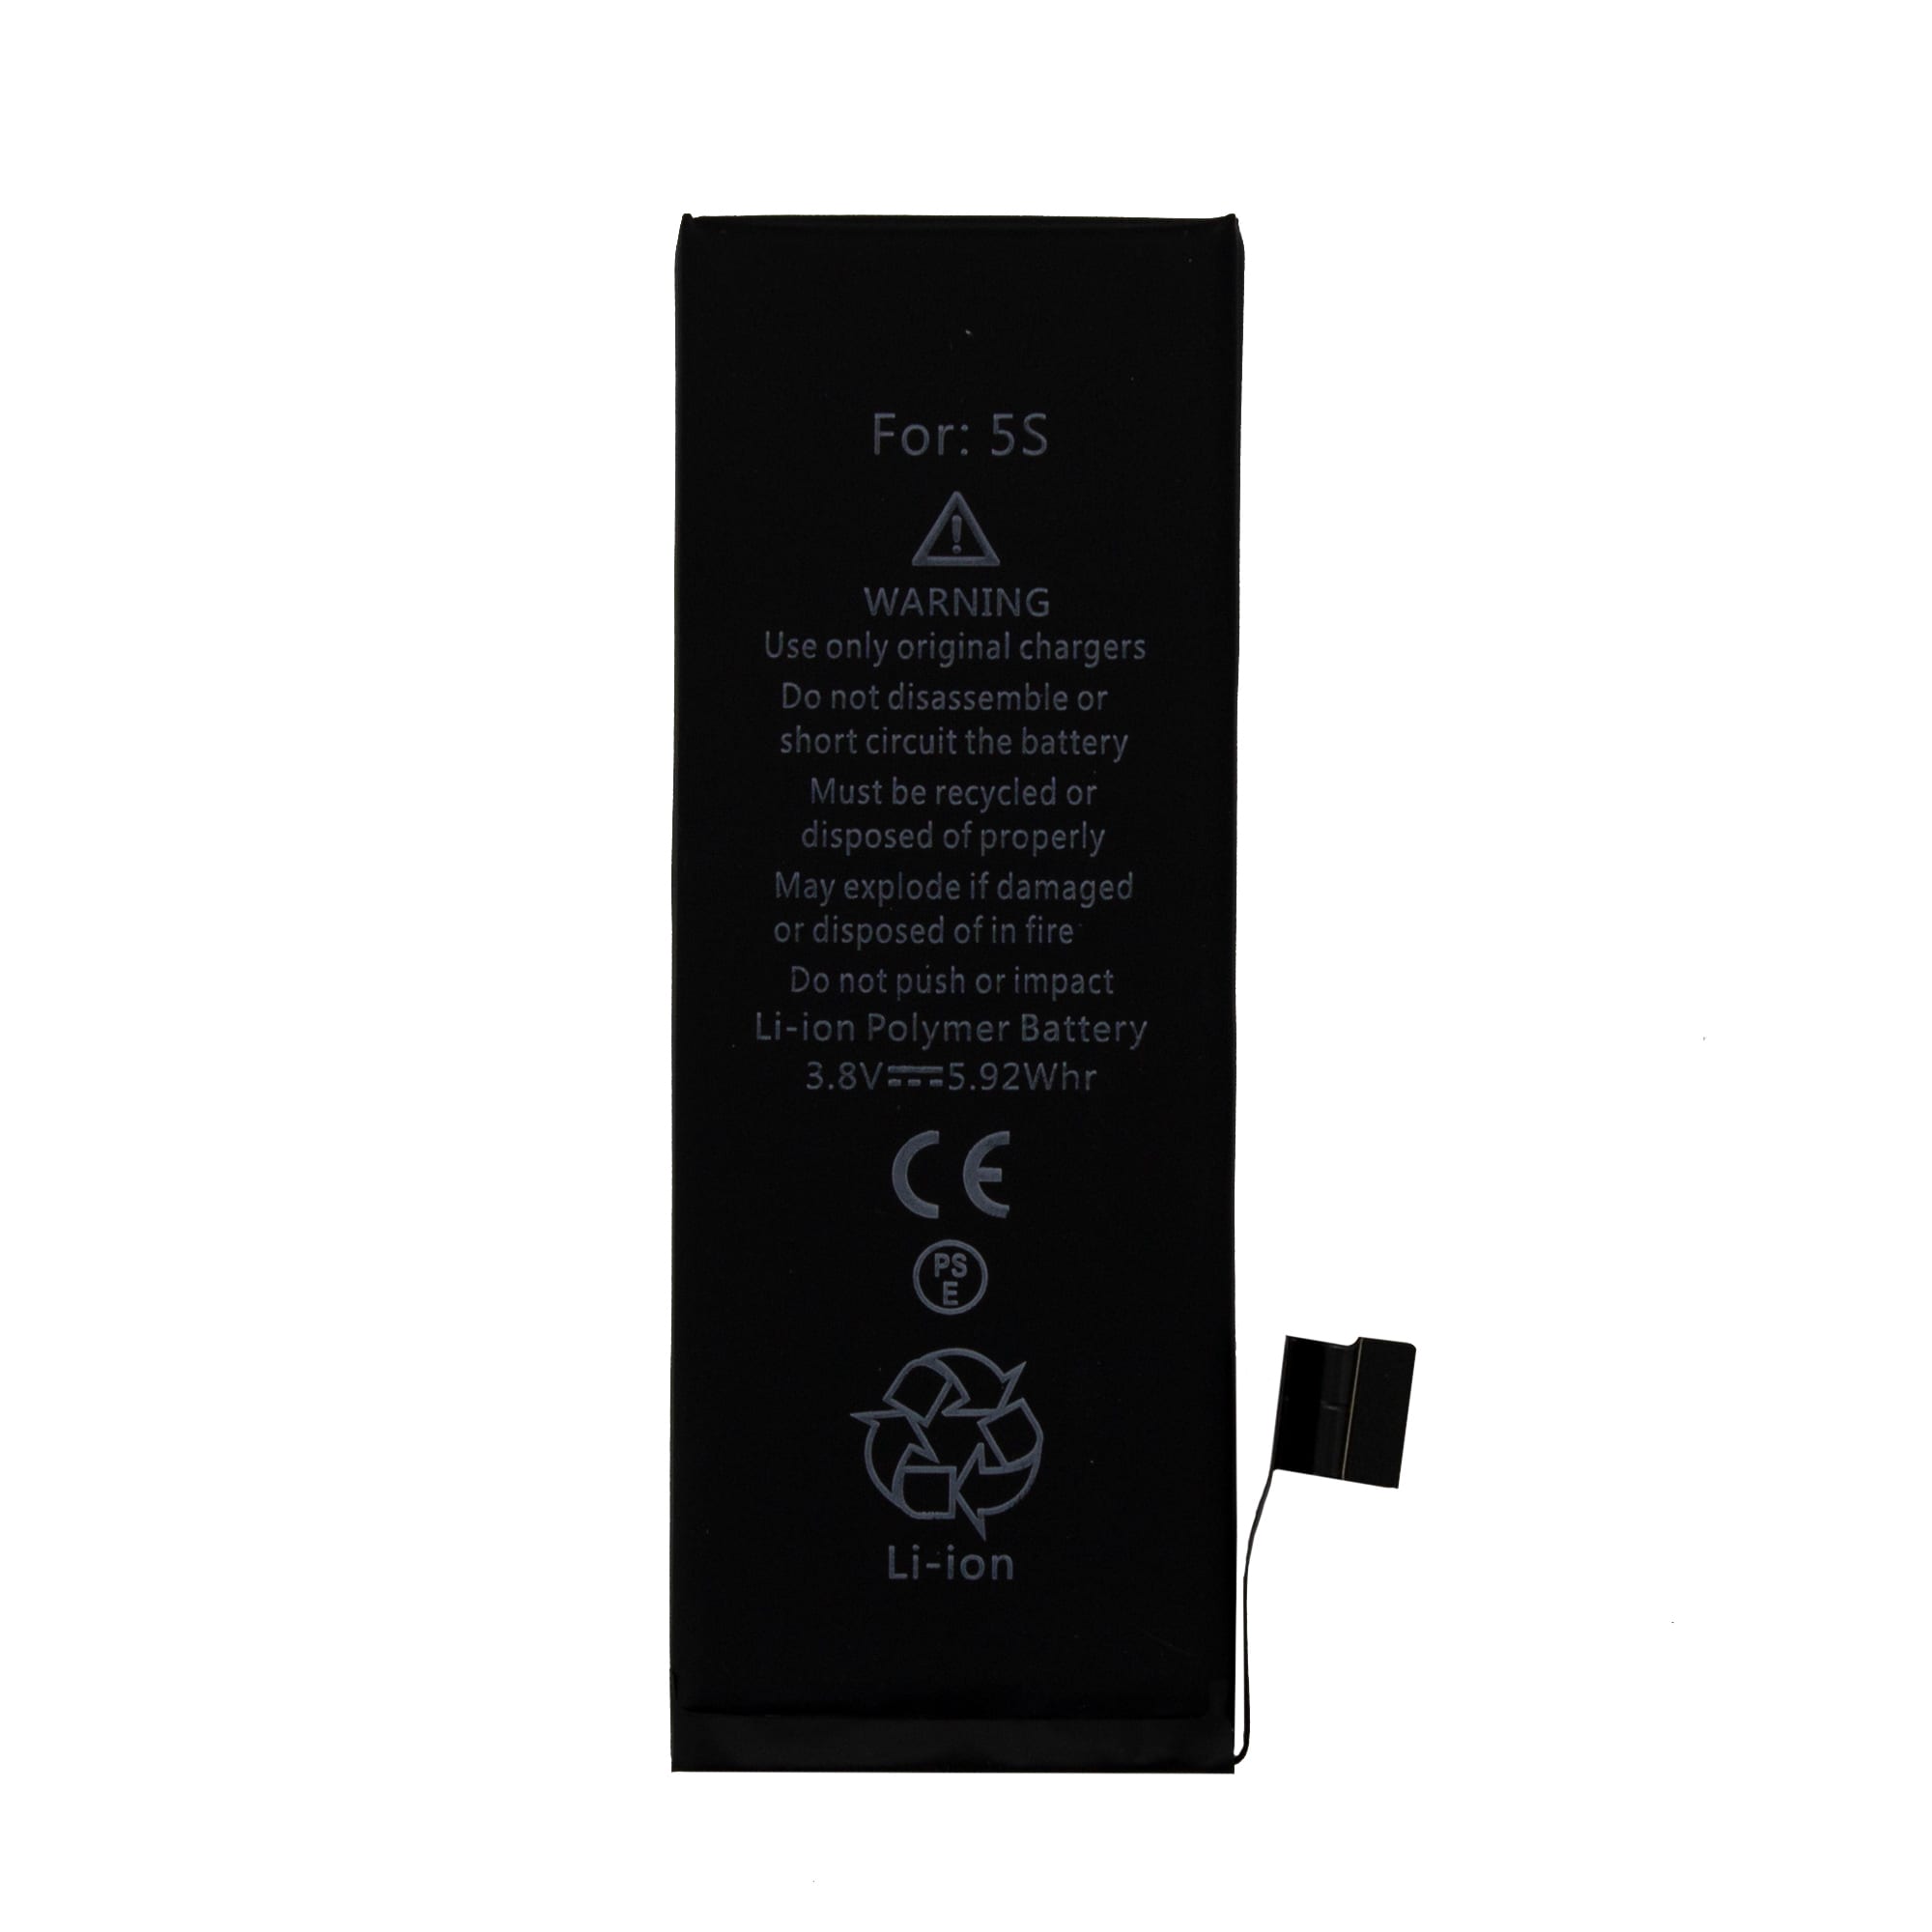 Huarigor Replacement Battery for iPhone 5S